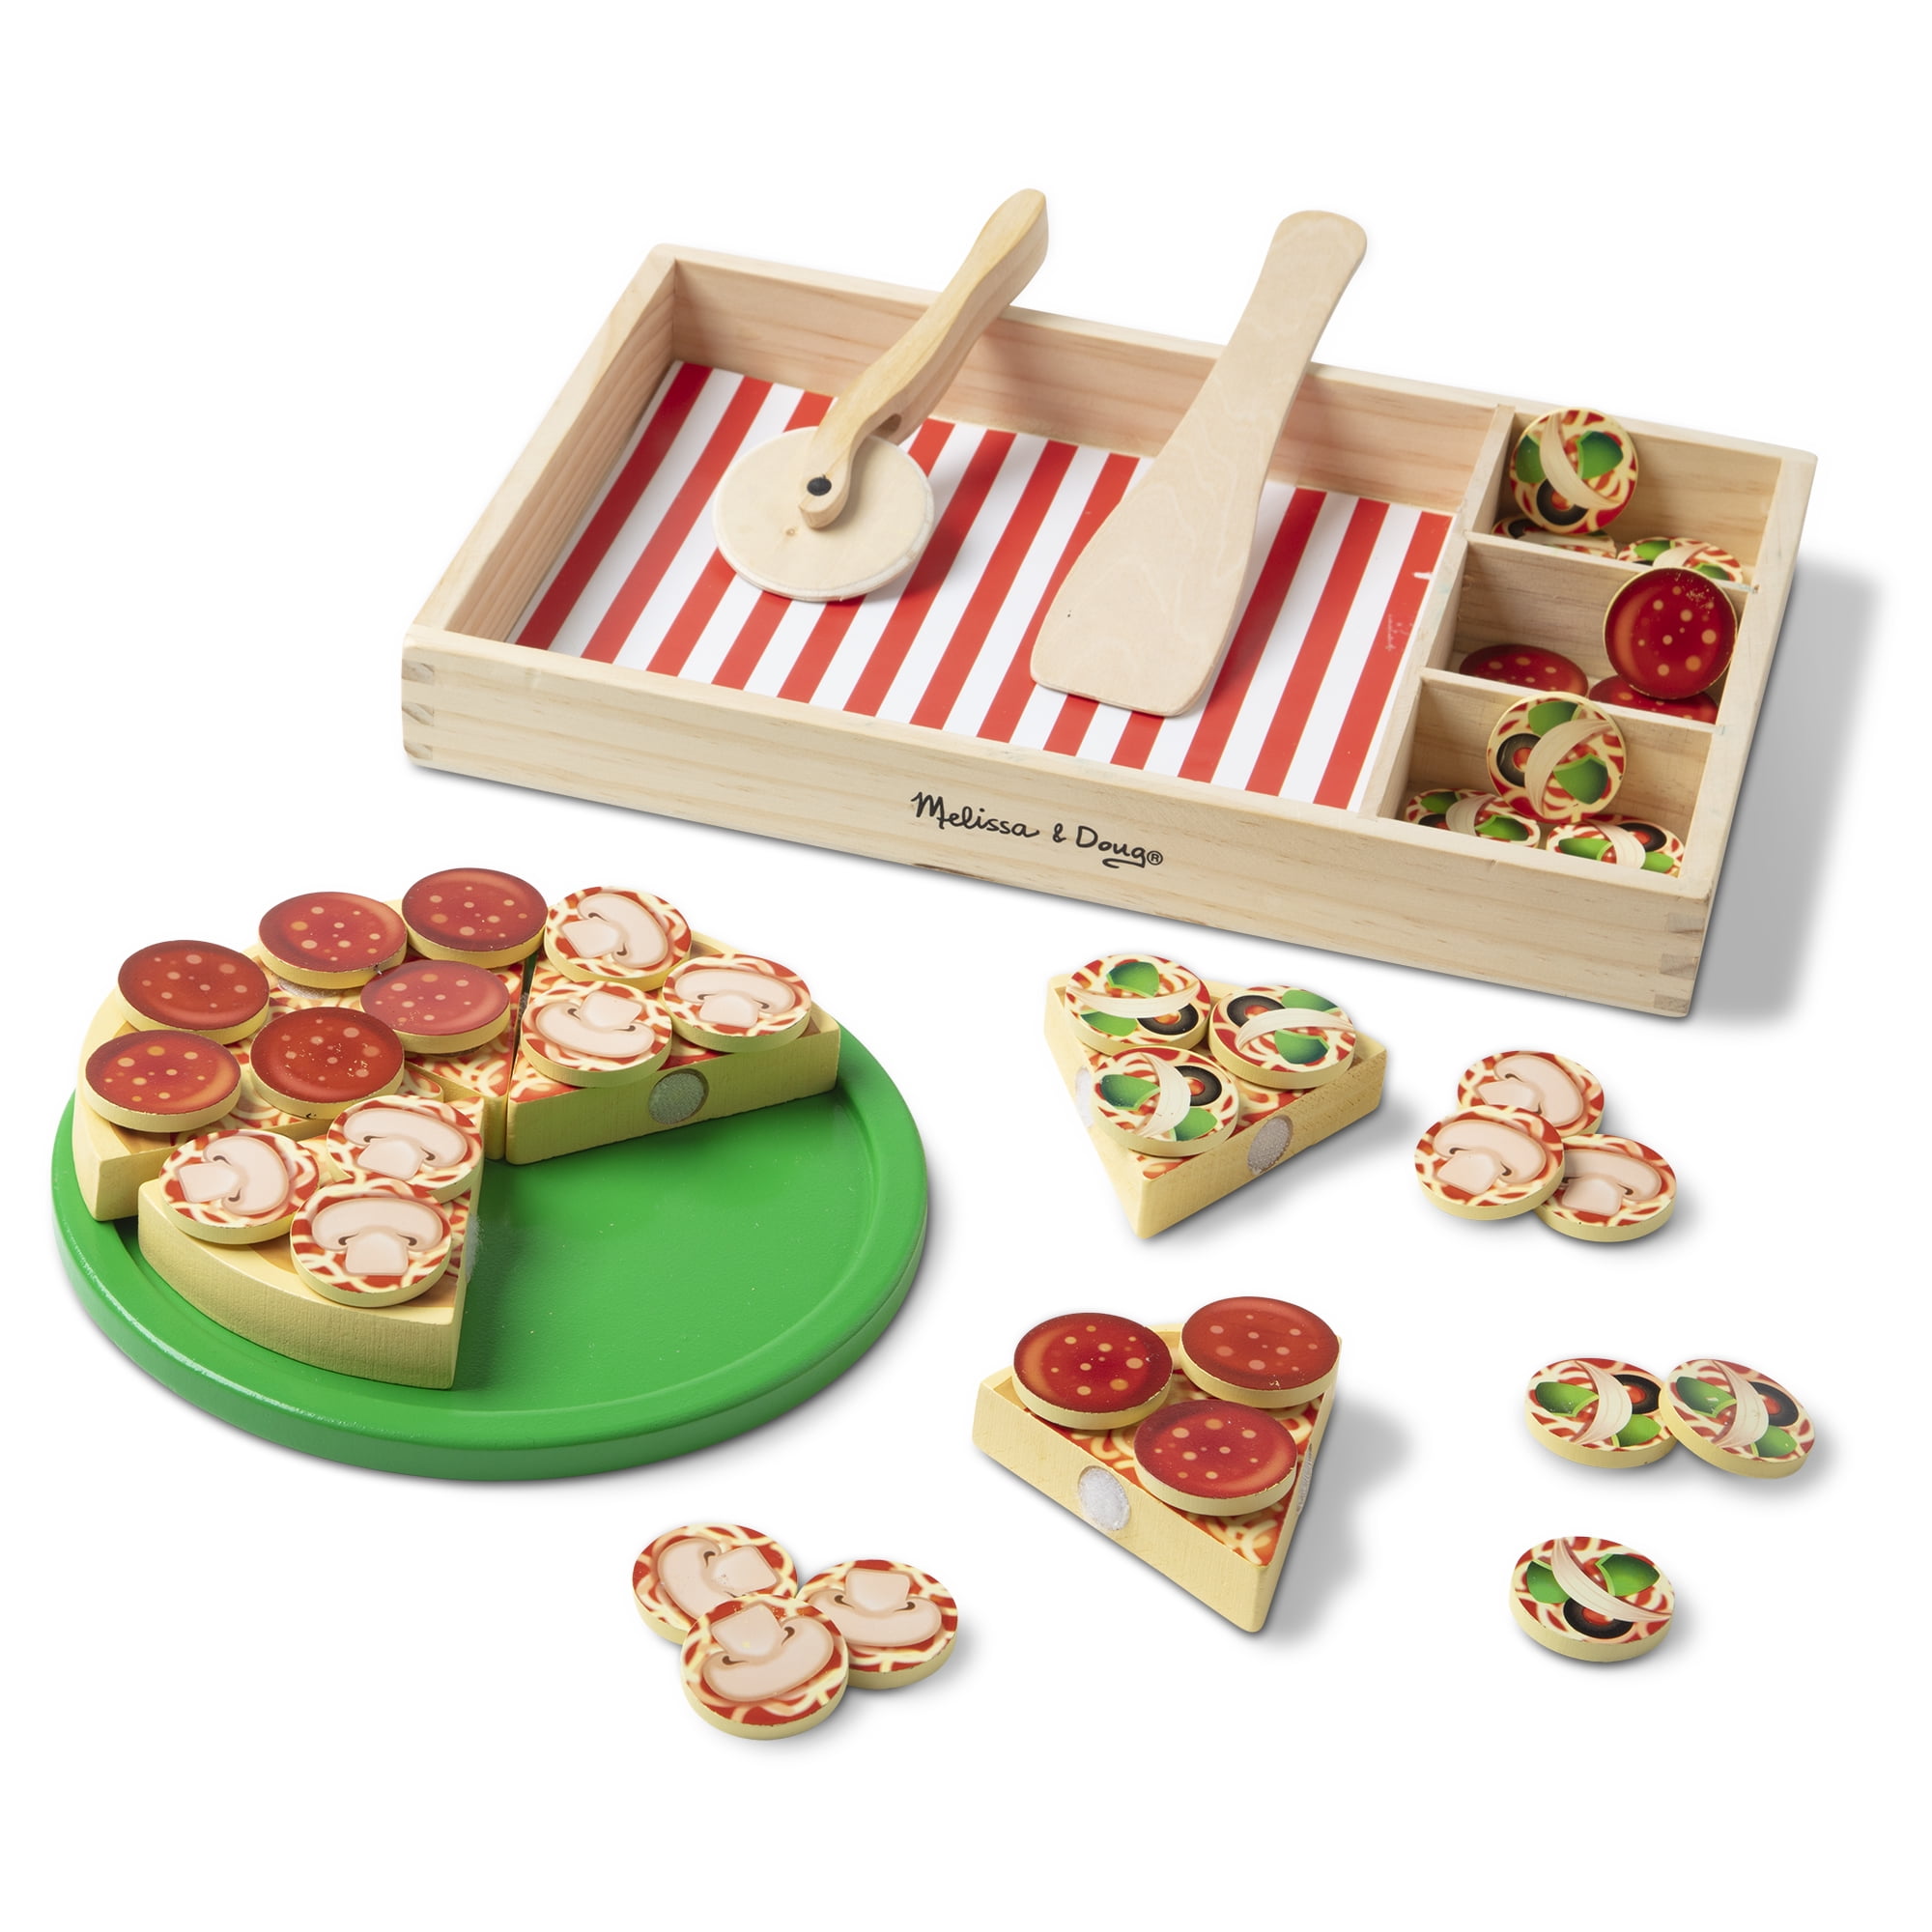 Wooden Pizza Play Food Set Wooden Toy Kids Pretend Kitchen Childrens Cooking O6 